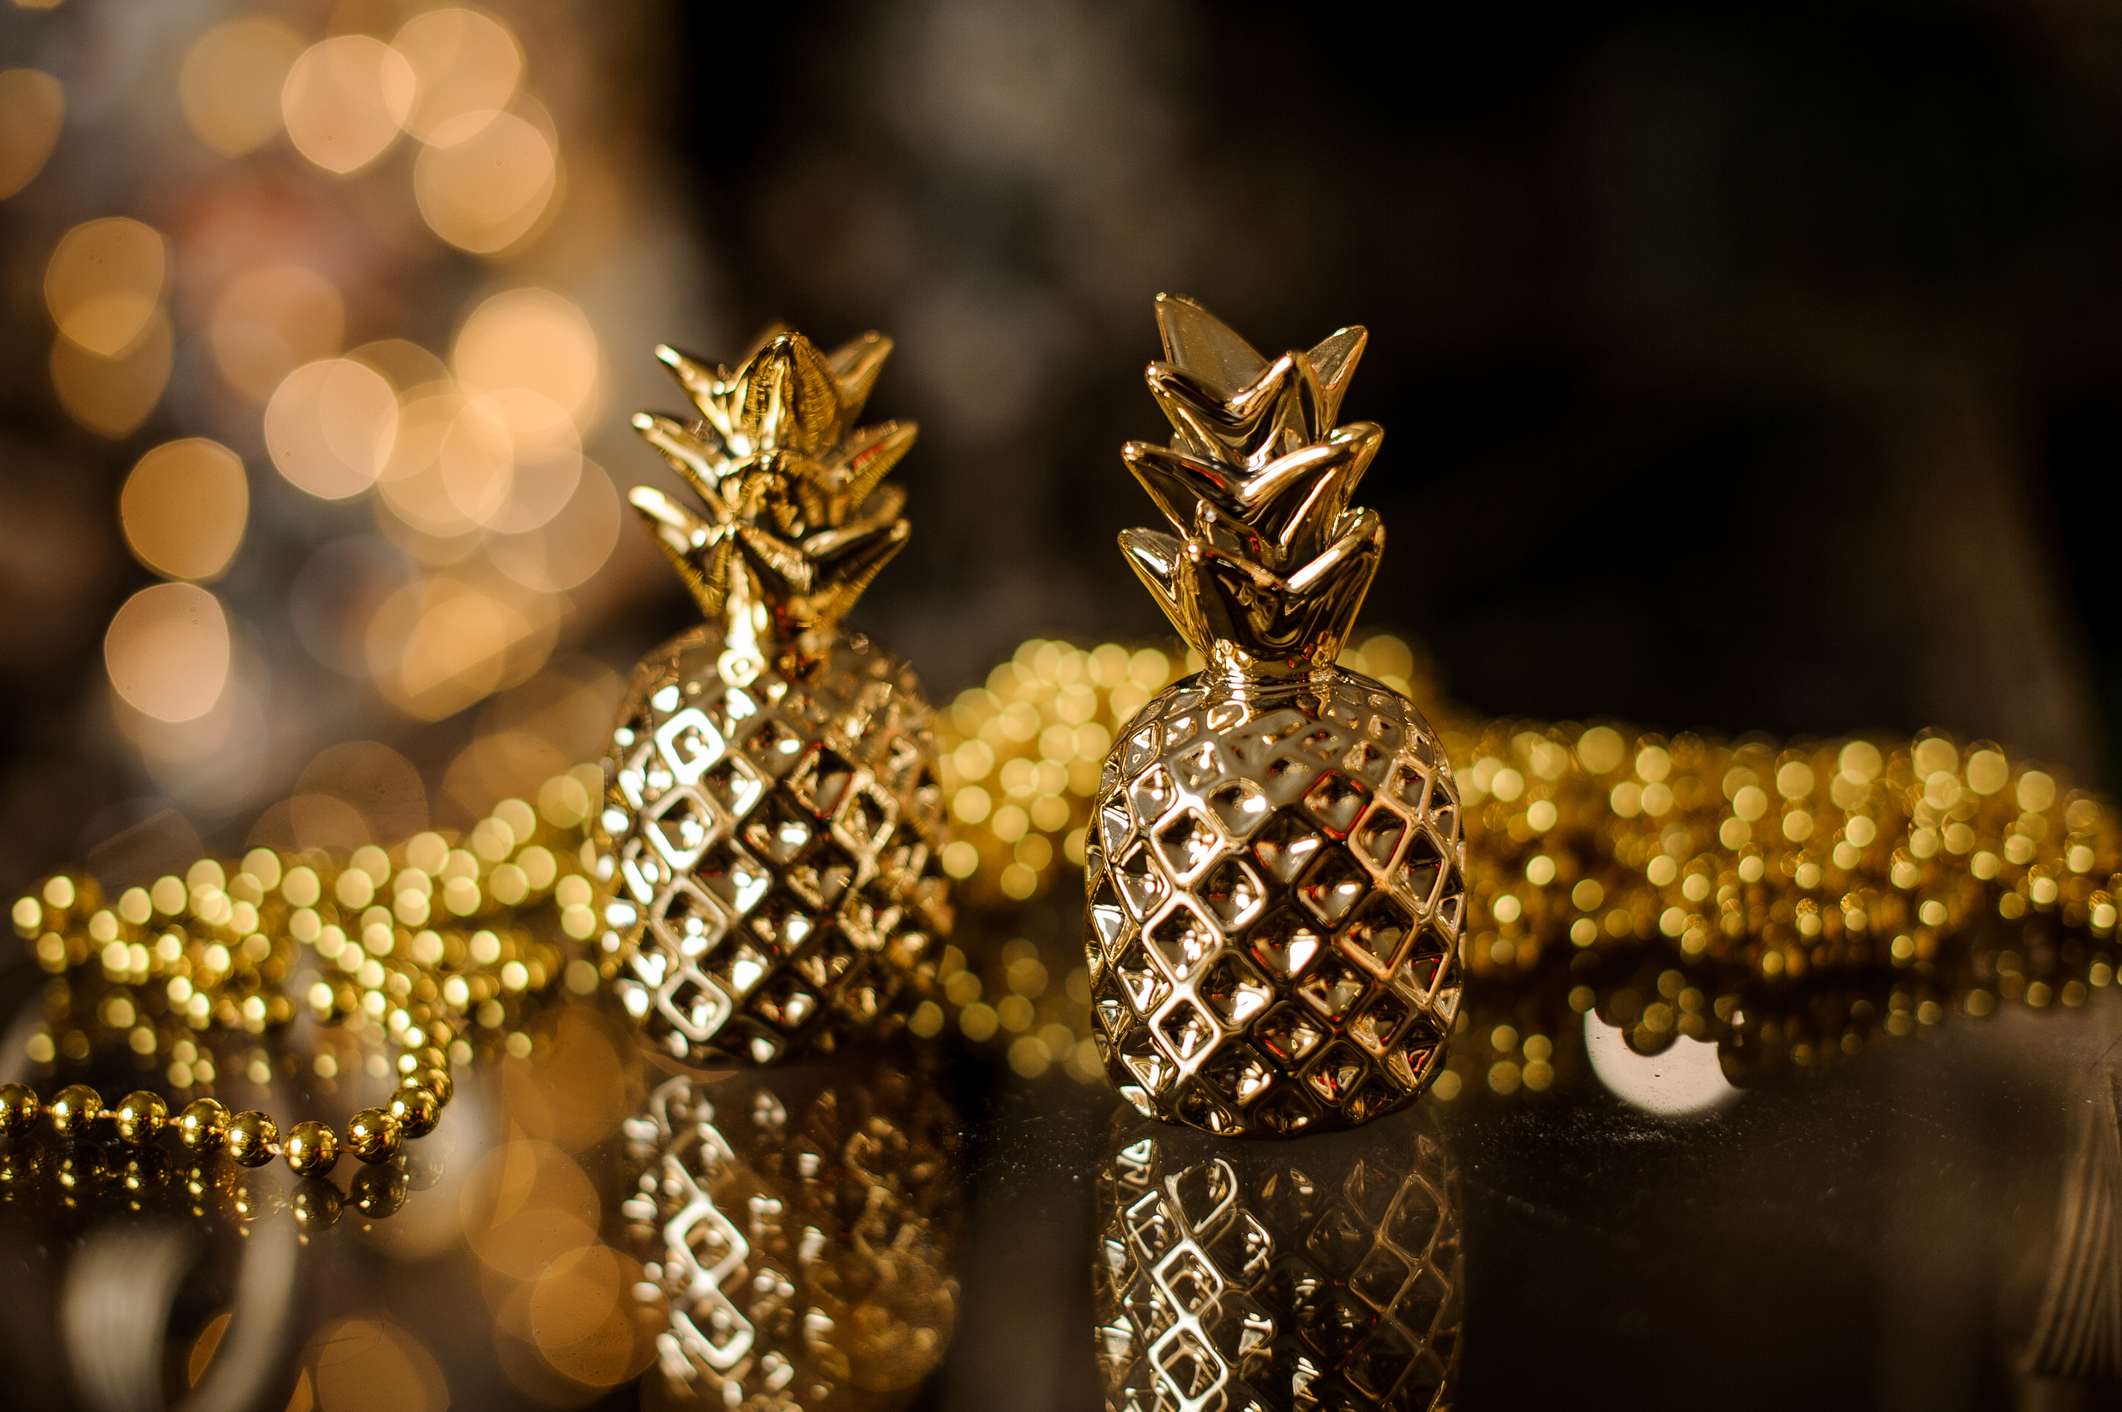 two gorgeous Christmas tree decorations in form of golden pineapples stand on glass table. Garland lights in background.